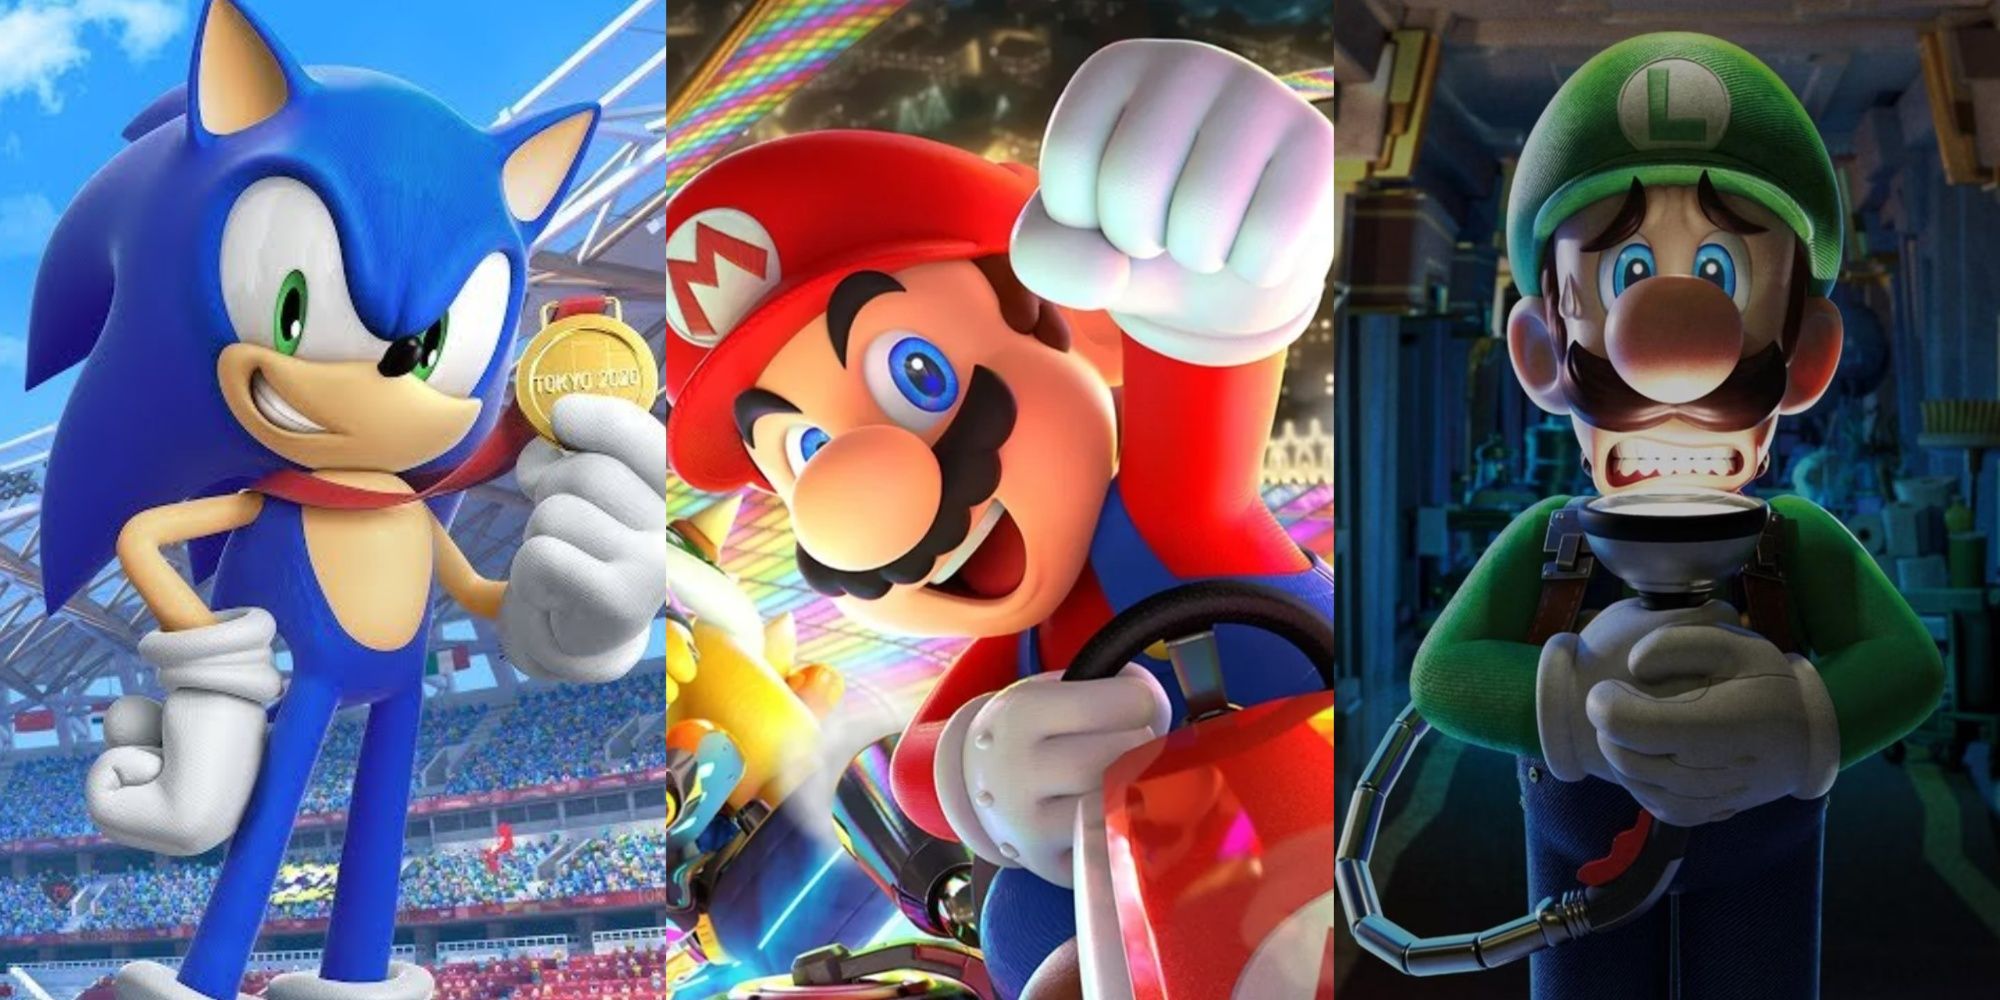 sonic holding a medal, mario in mario kart, and luigi holding a torch